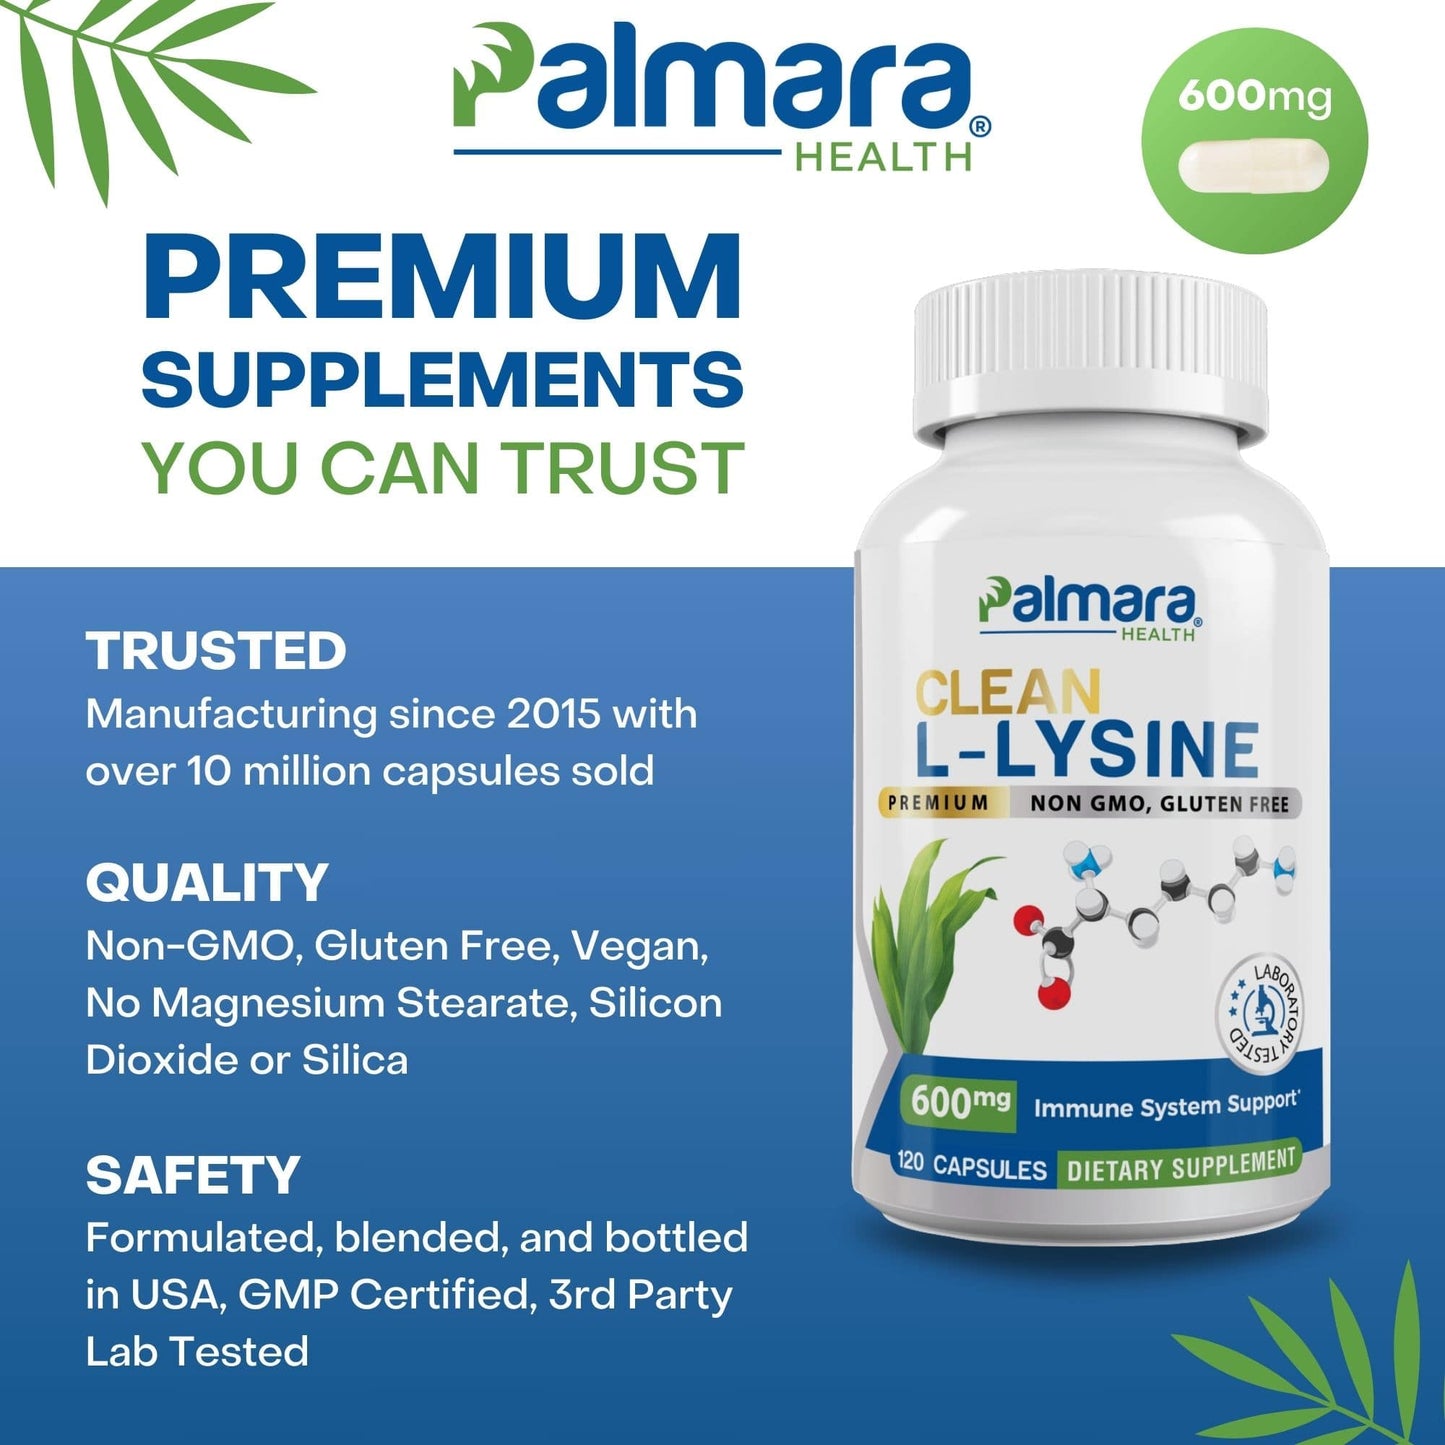 
                  
                     Image of Palmara Health's 600mg Clean L-Lysine supplement bottle, highlighting non-GMO, gluten-free, and vegan qualities for immune system support.
                  
                